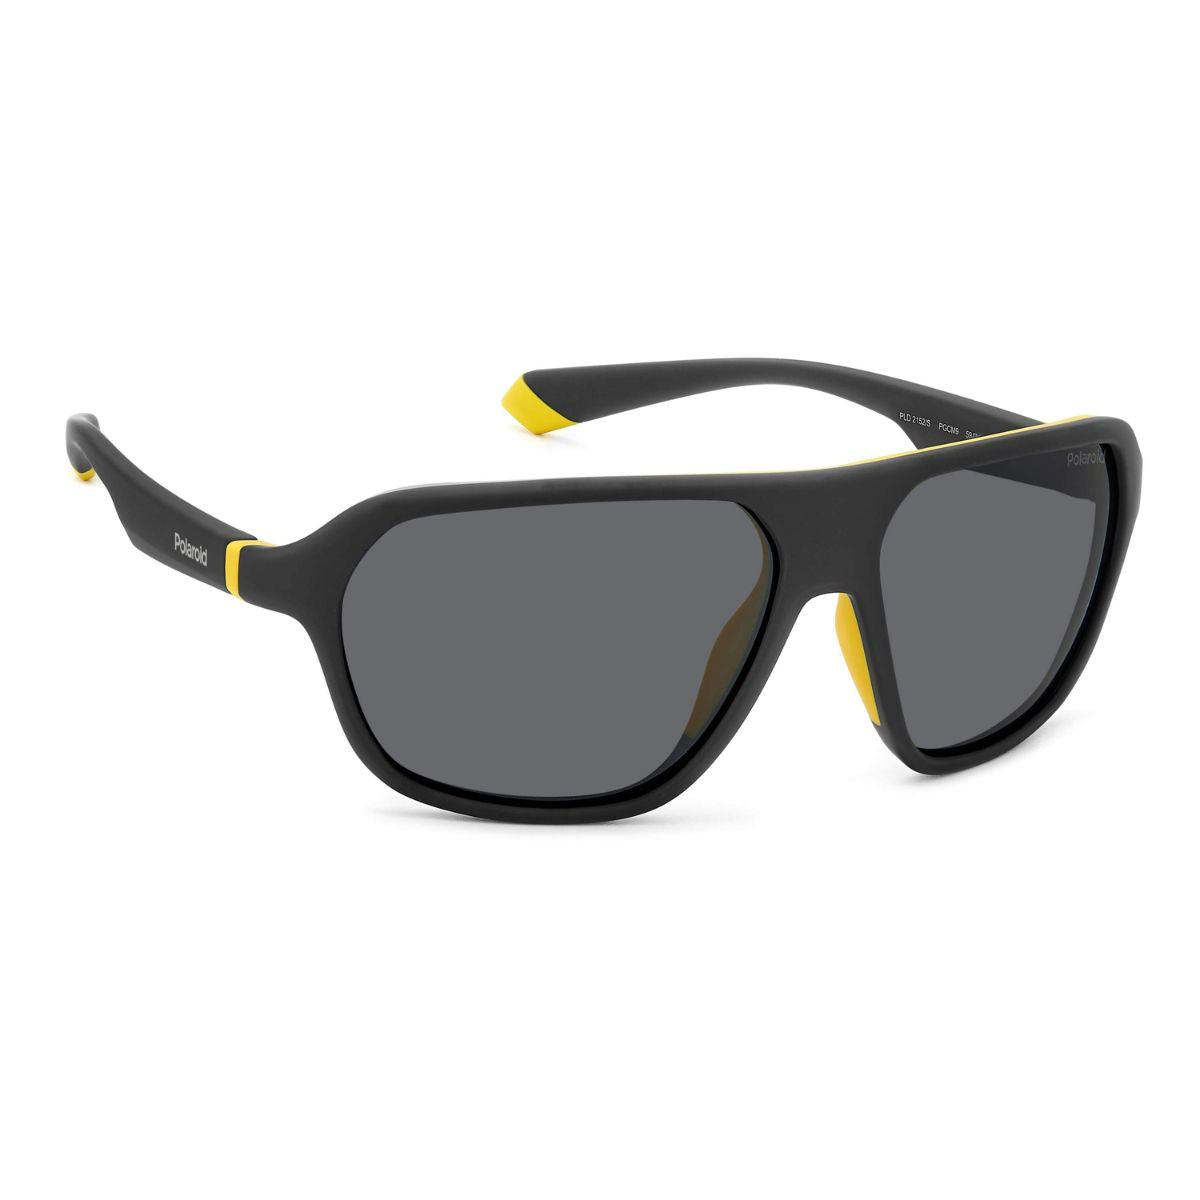 "Buy Latest Rectangle Polarized Sunglasses For Men's and Women's At Optorium"